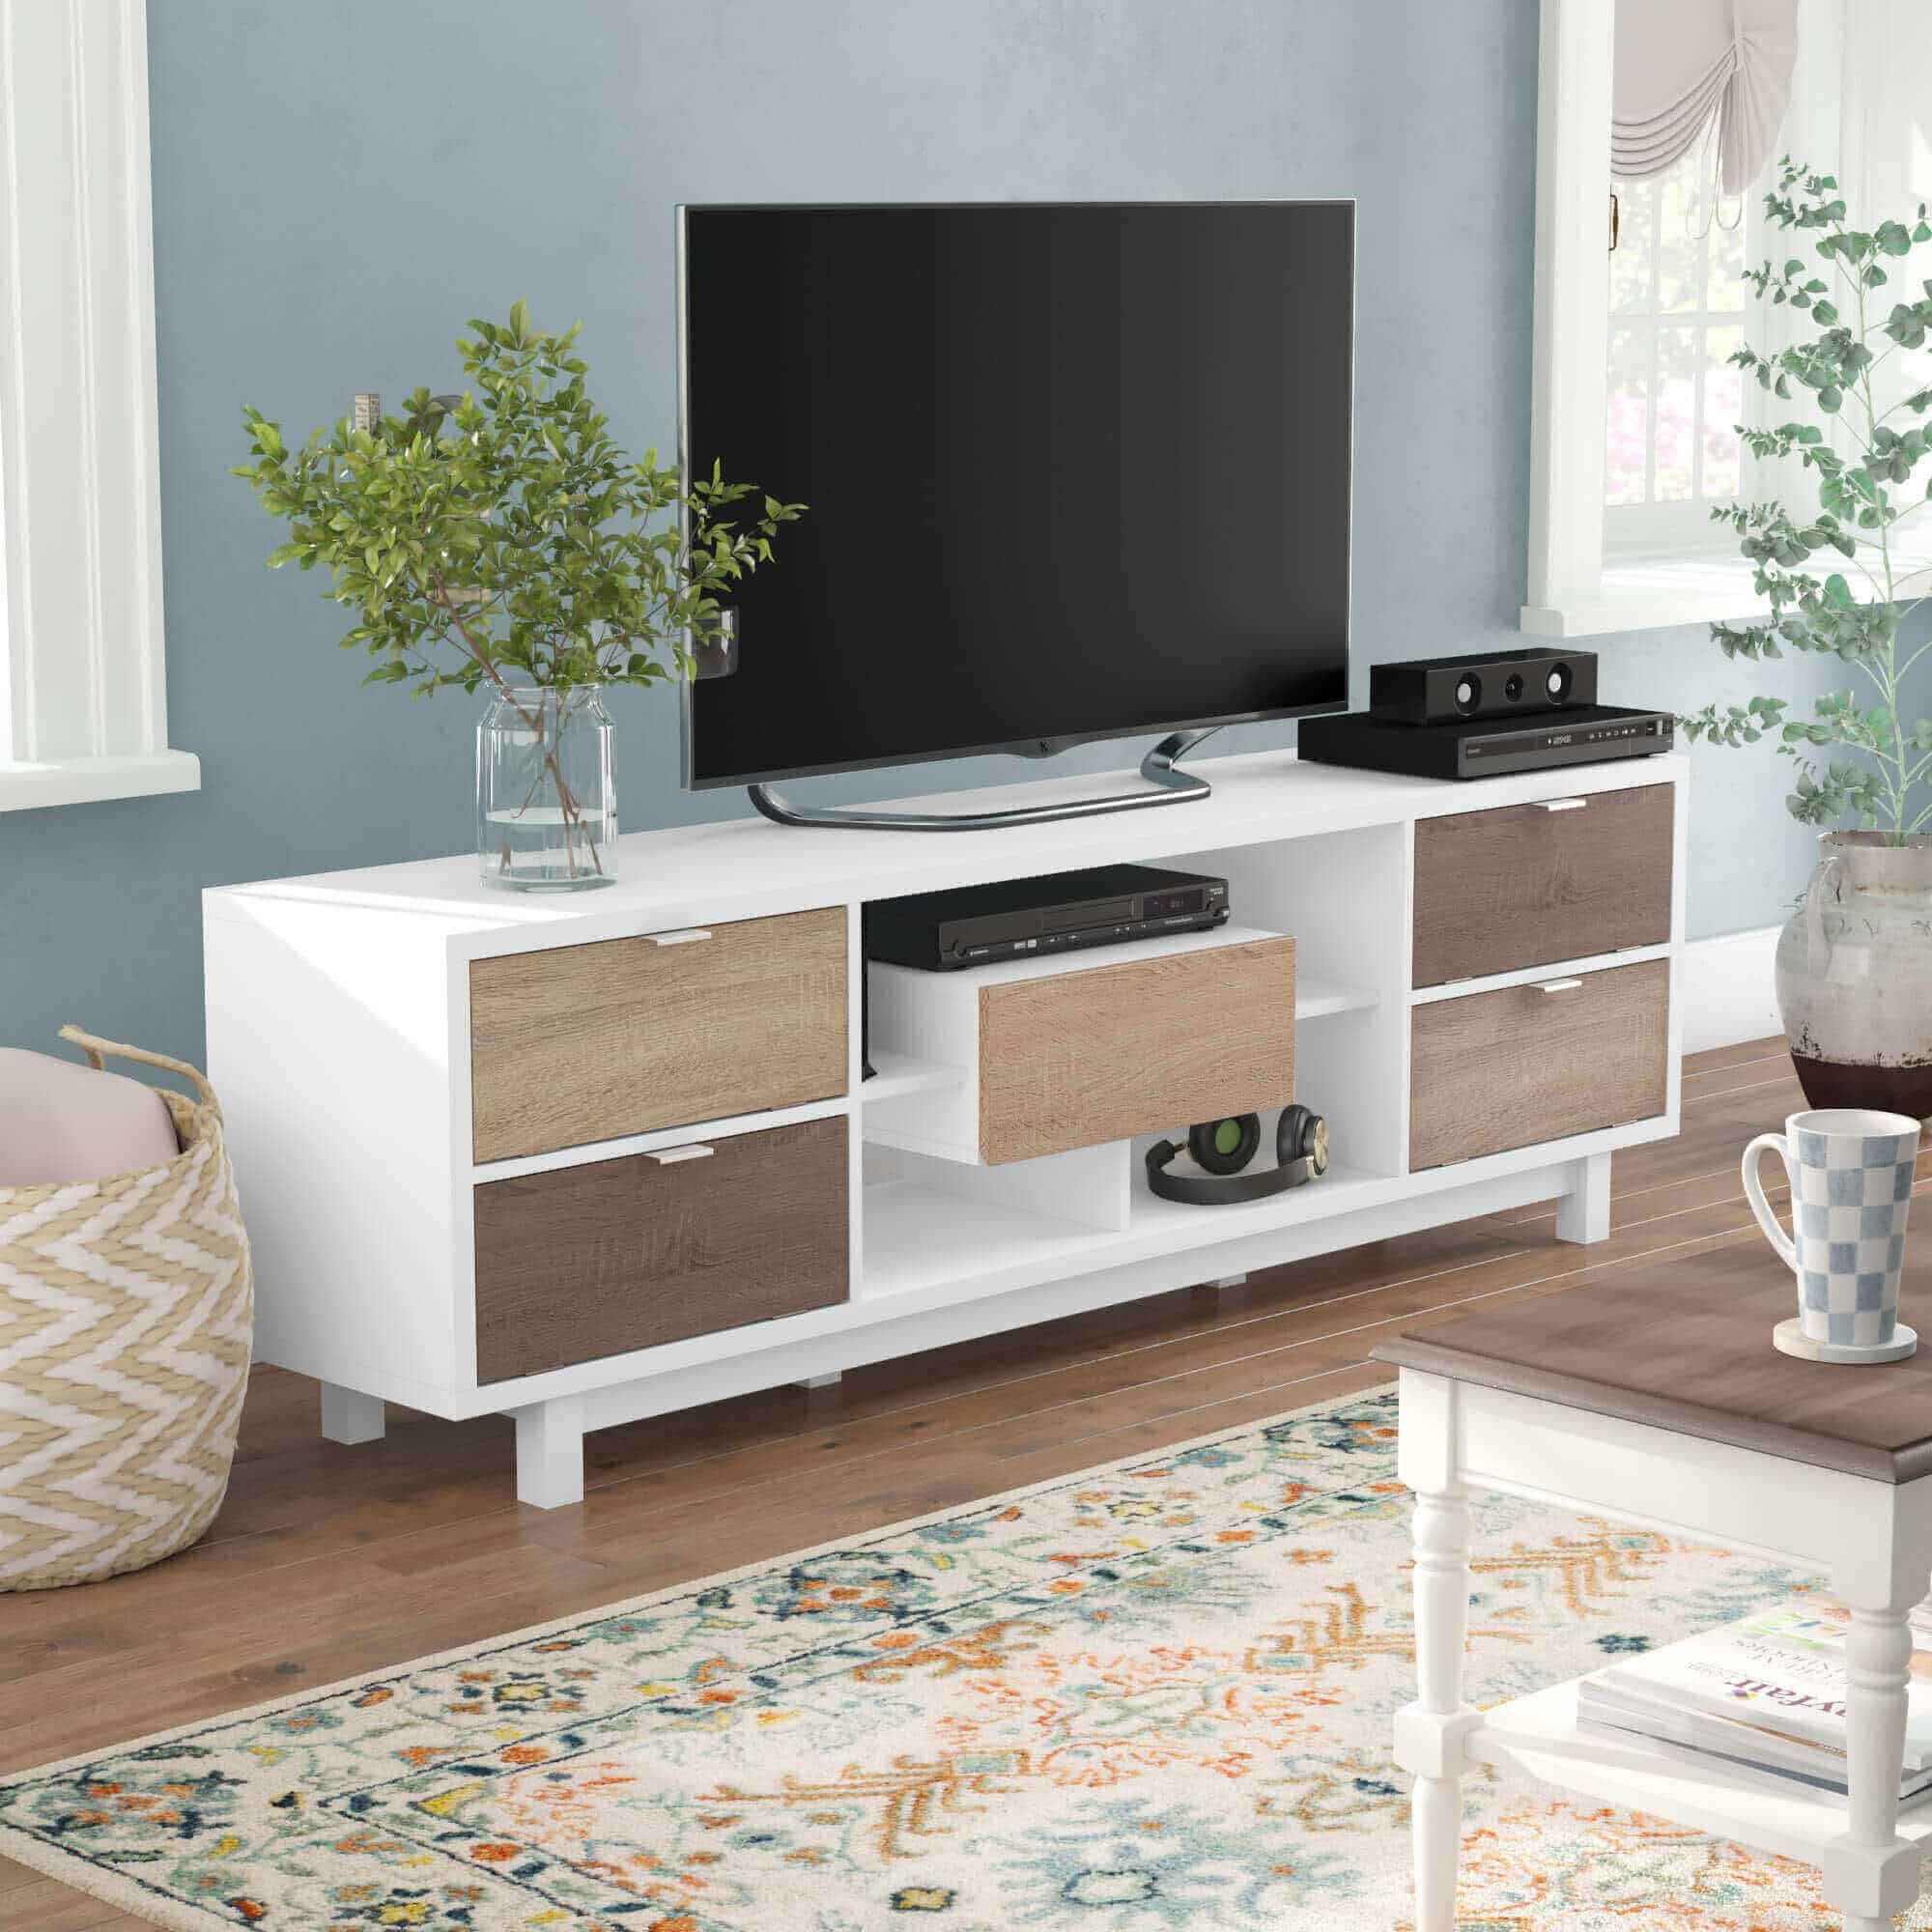 Most Beautiful And Incredible Tv Stand Design Ideas Inside Modern Design Tv Cabinets (View 5 of 15)